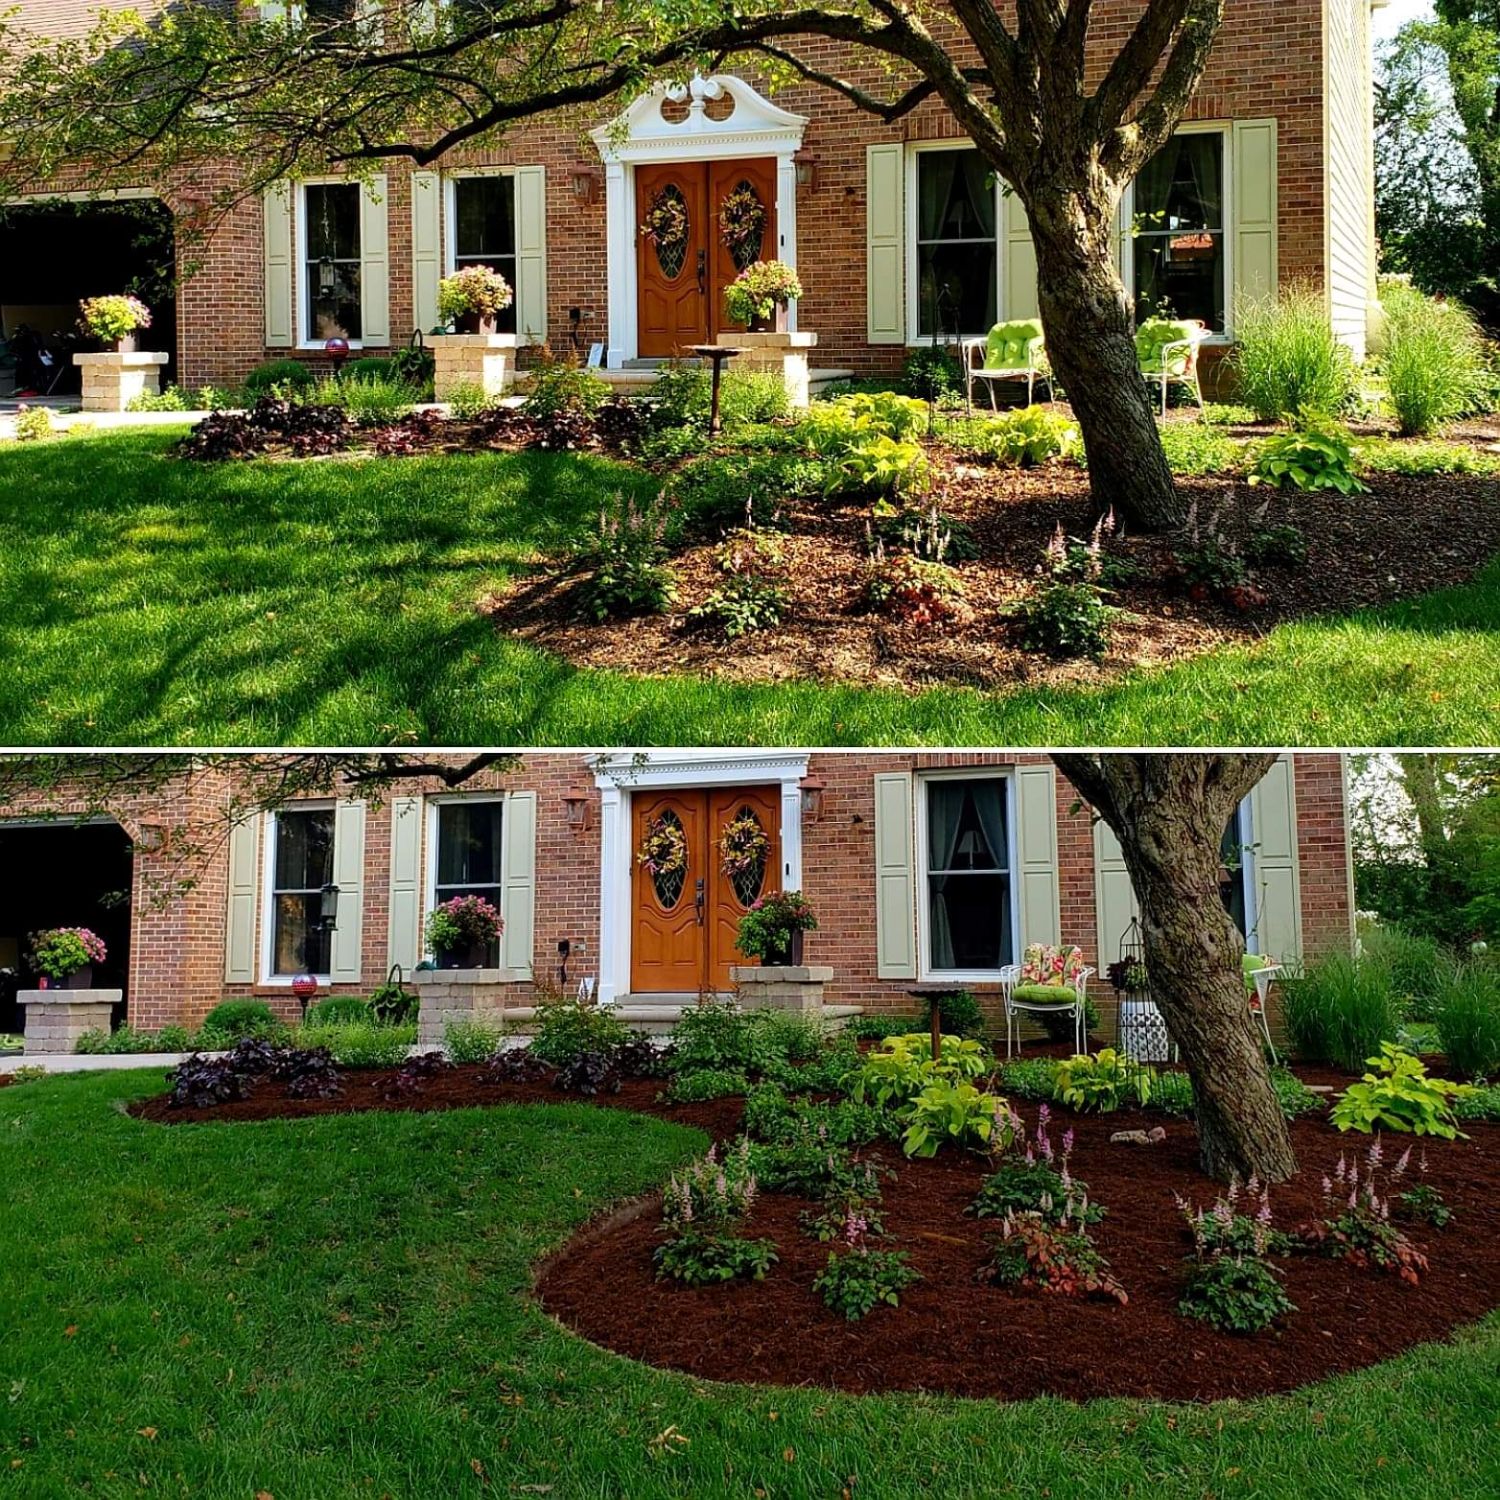 Gallery Monarch Landscaping Design